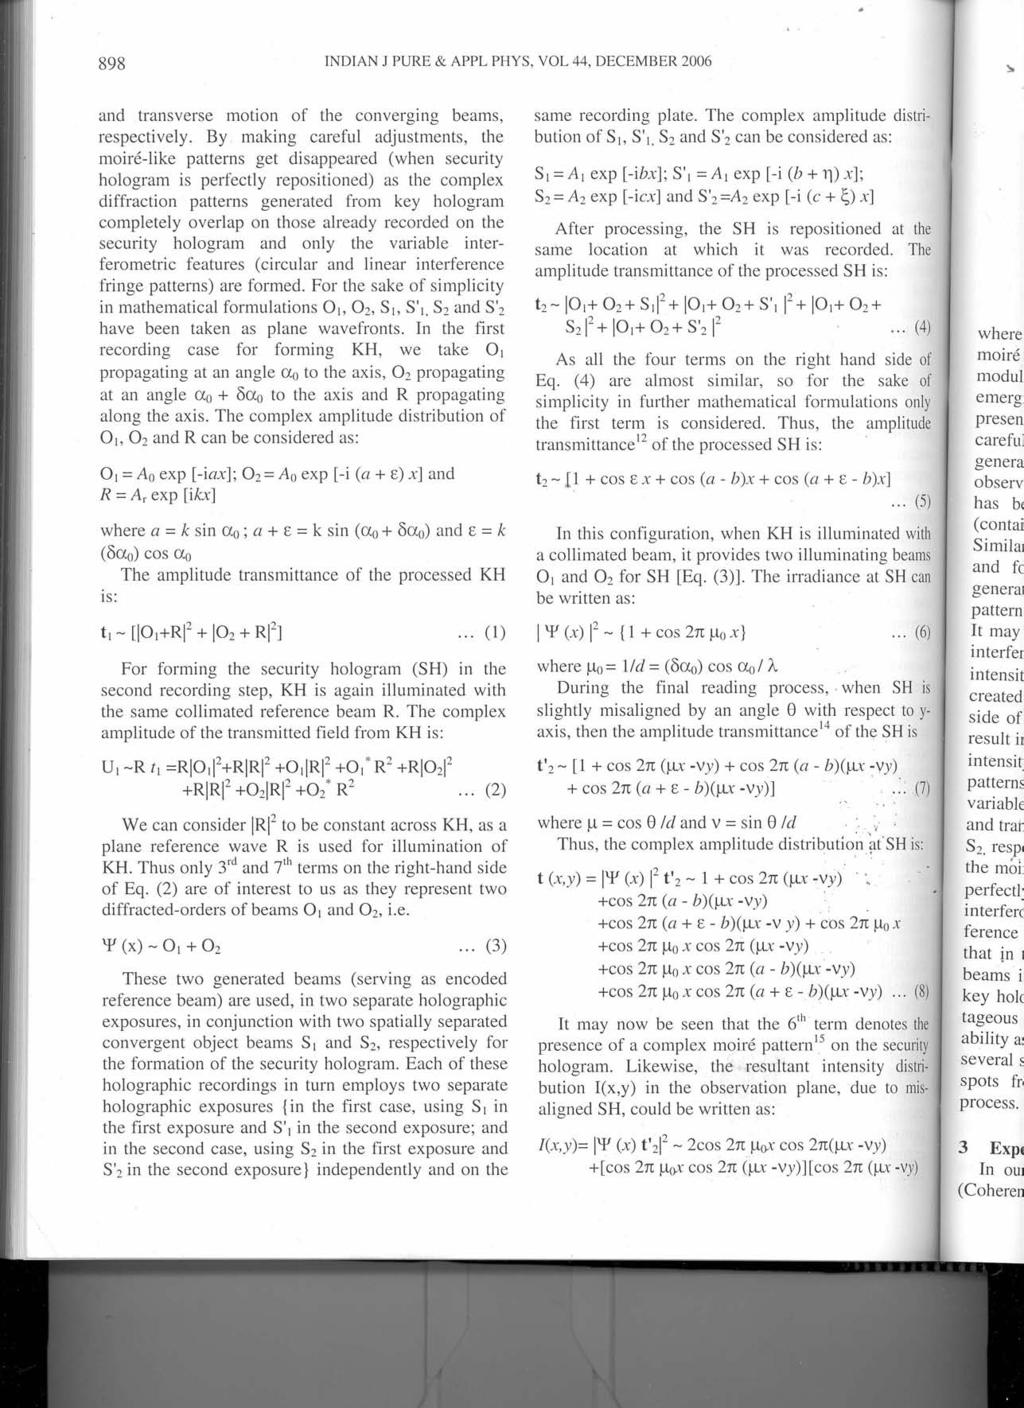 898 INDIAN J PURE & APPL PHYS, VOL 44, DECEMBER 2006 and transverse motion of the converging beams, respectively.